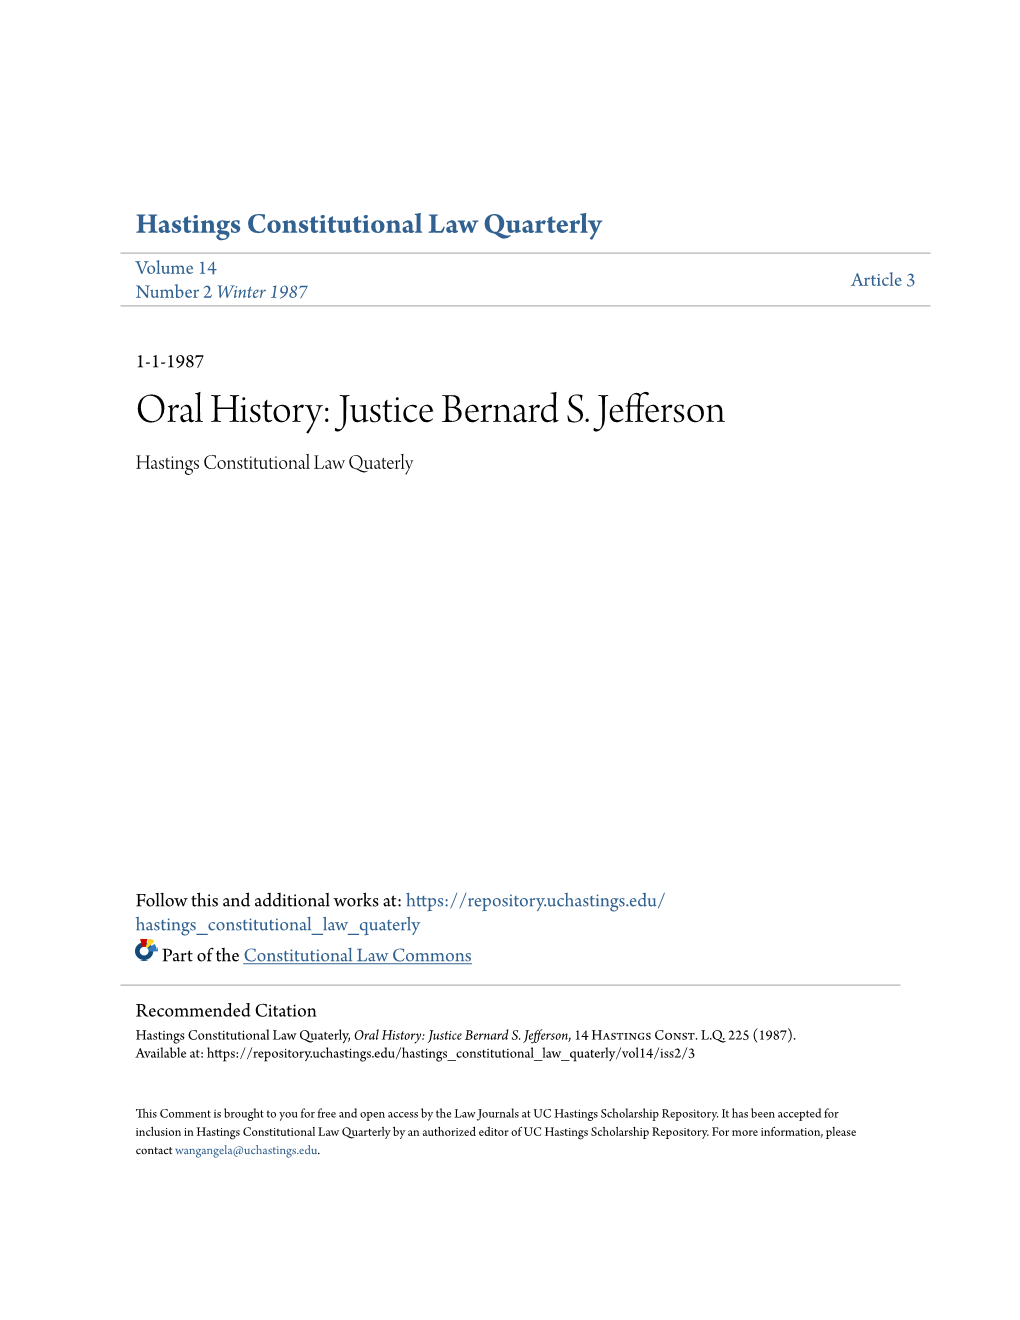 Justice Bernard S. Jefferson Hastings Constitutional Law Quaterly